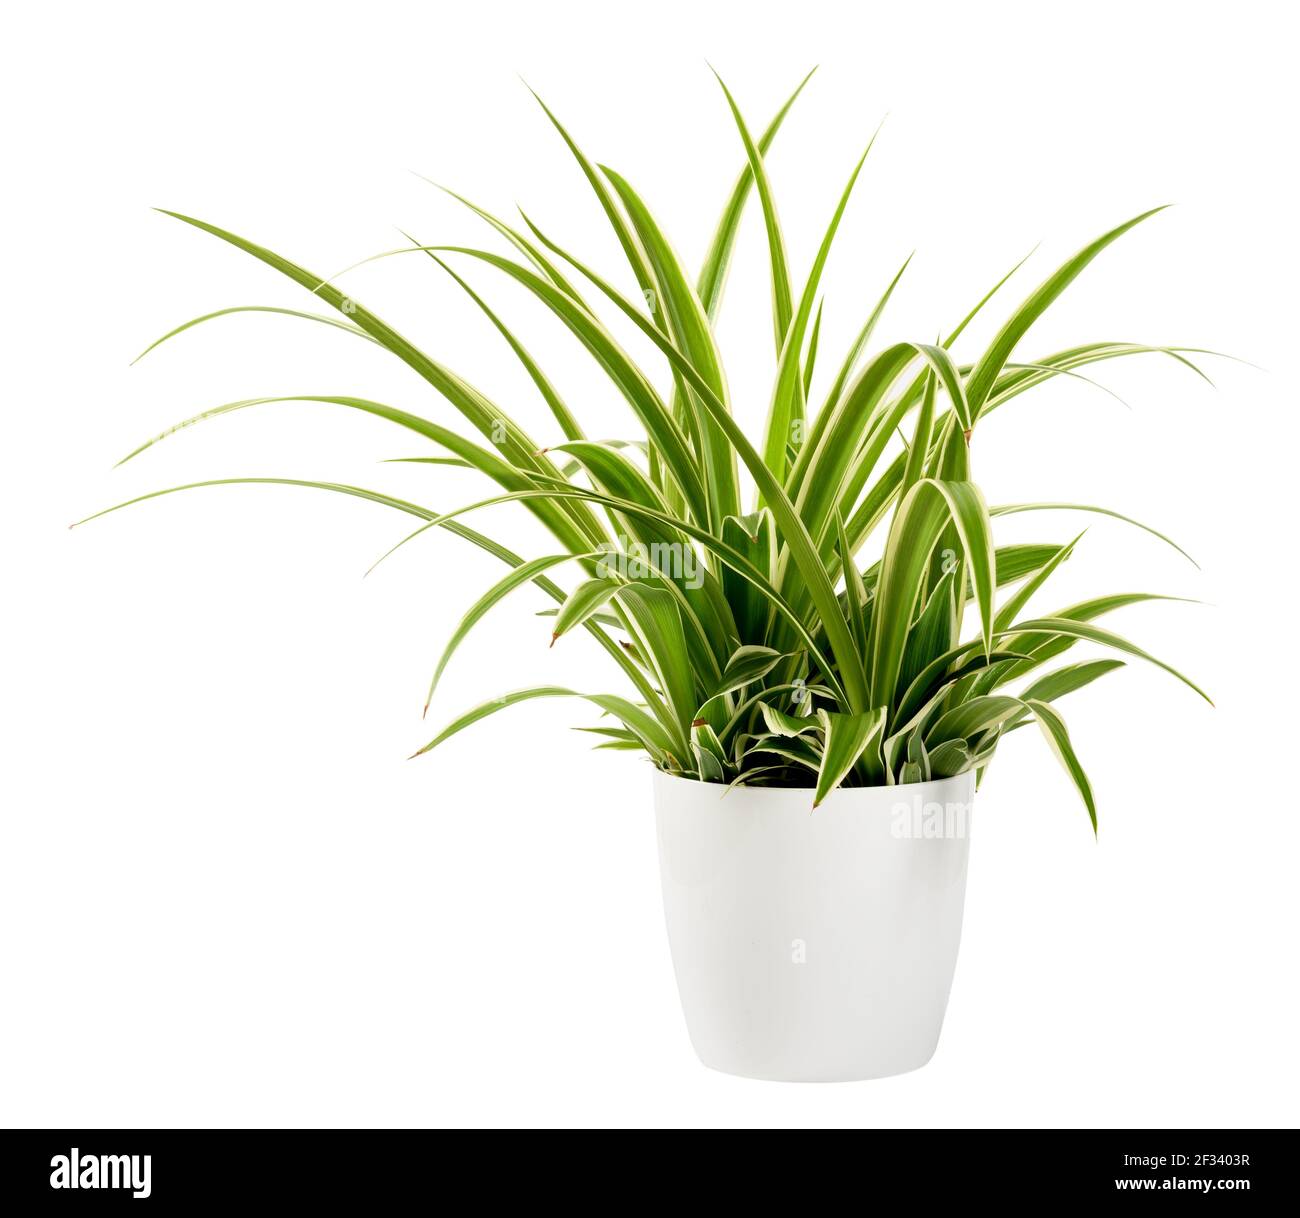 Sword-like ornamental leaves of a potted Chlorophytum laxum plant with green and white variegated margins in a close up side view isolated on white Stock Photo